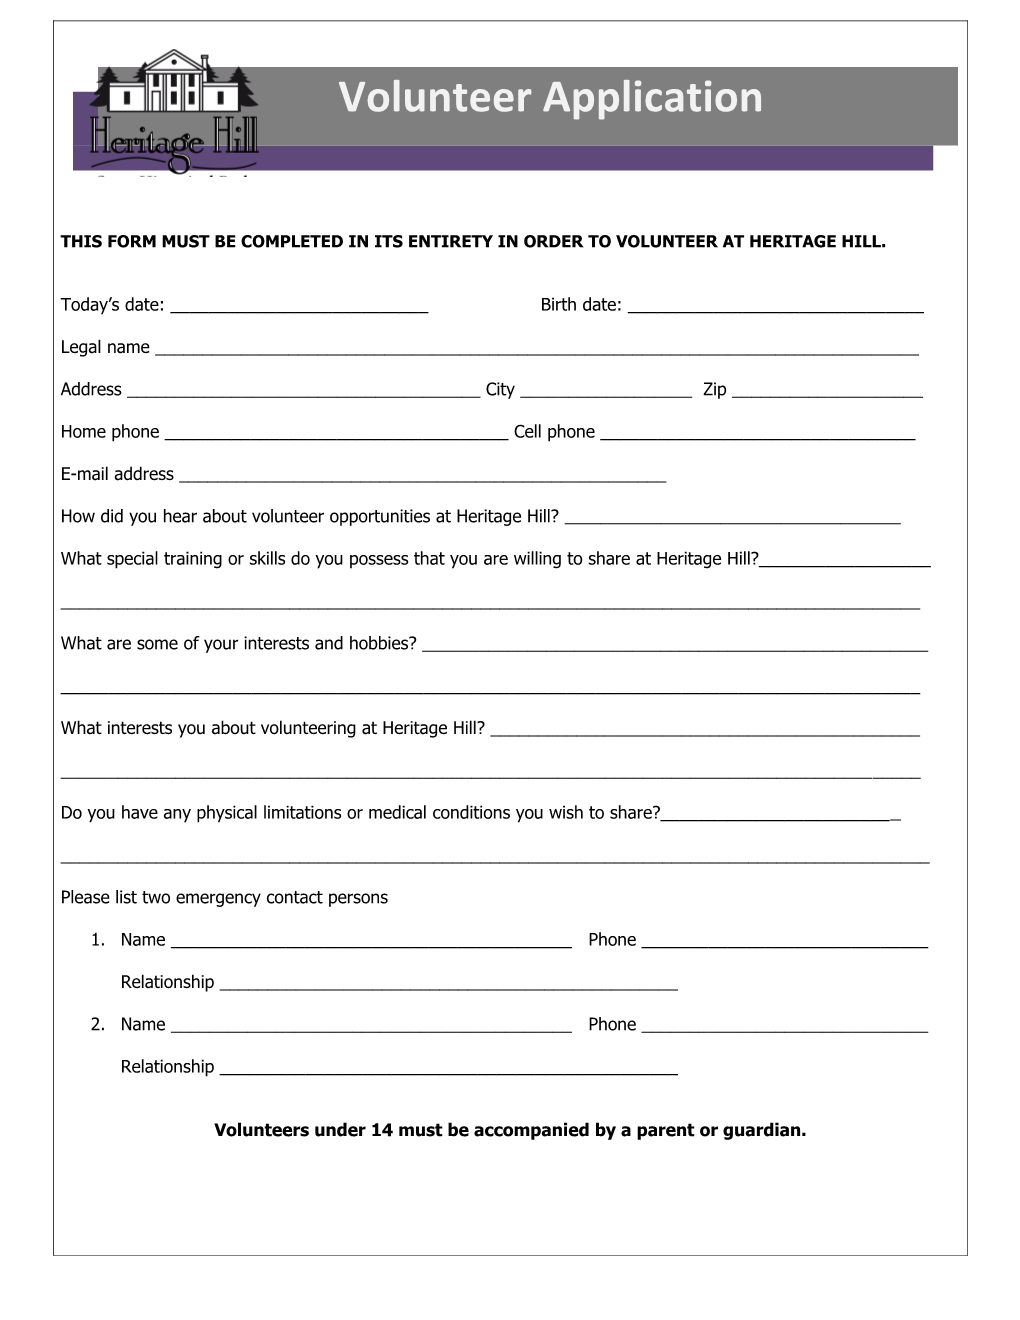 This Form Must Be Completed in Its Entirety in Order to Volunteer at Heritage Hill